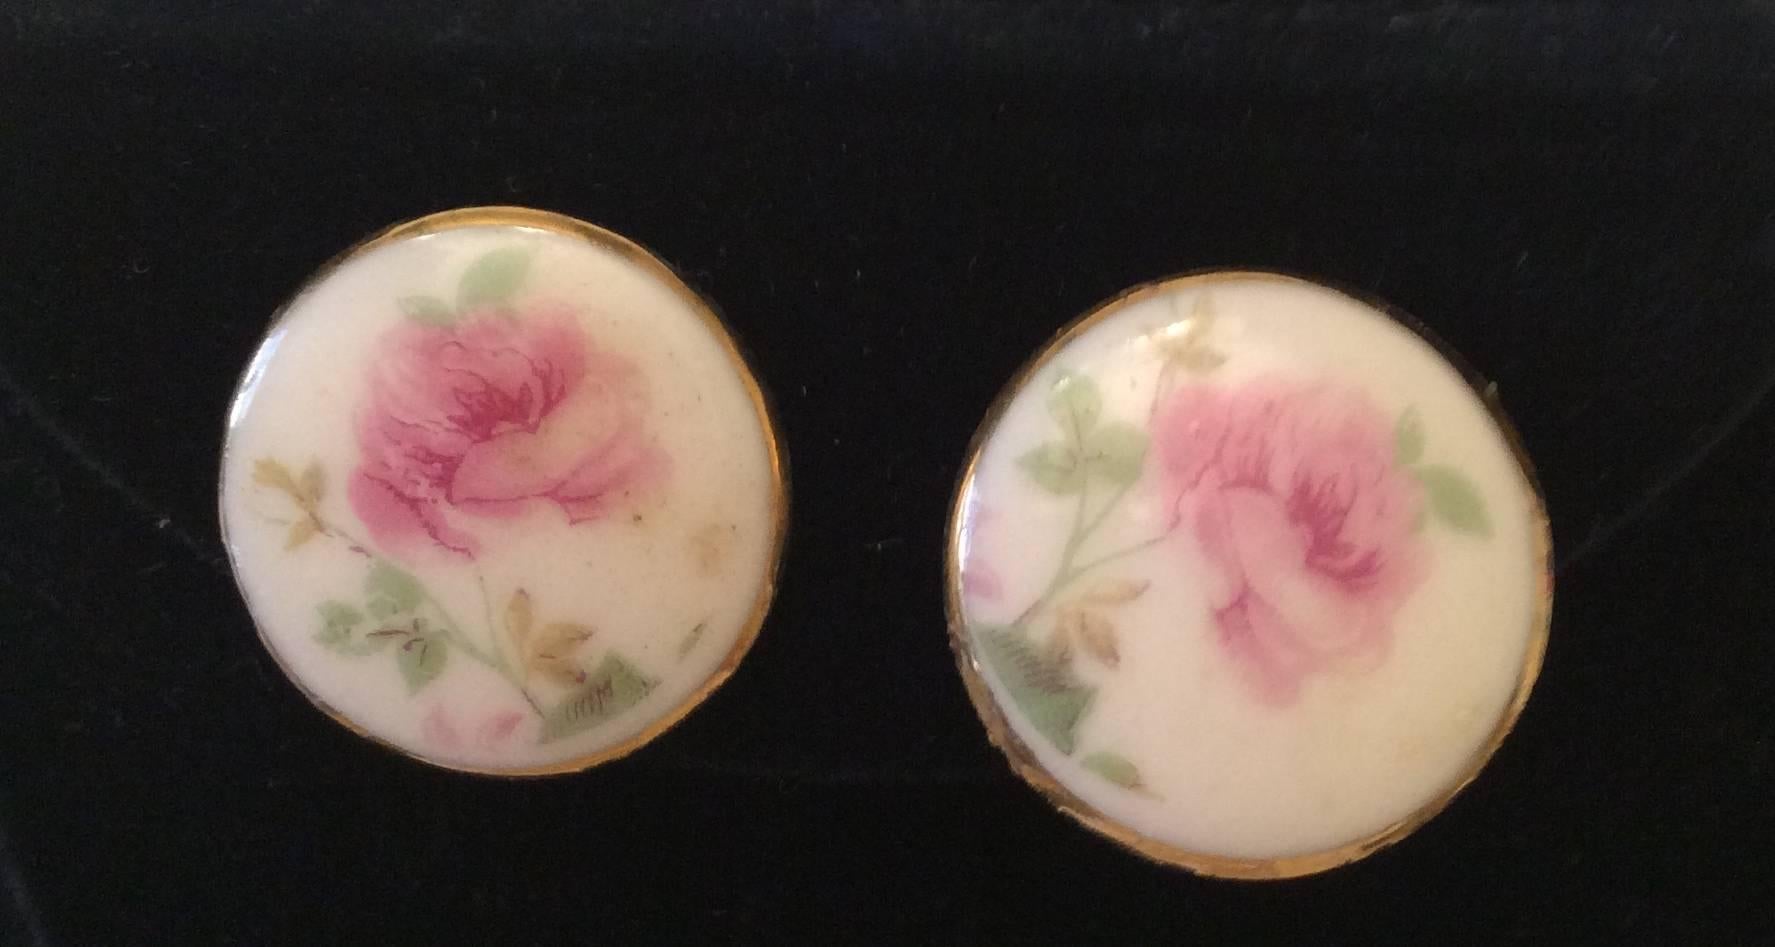 Presented here is a beautiful brooch and earring set from the 1920's. The set is all made out of porcelain and set in gold tone metal backings. The images painted onto the porcelain are that of beautiful pink roses on each piece. The brooch has a